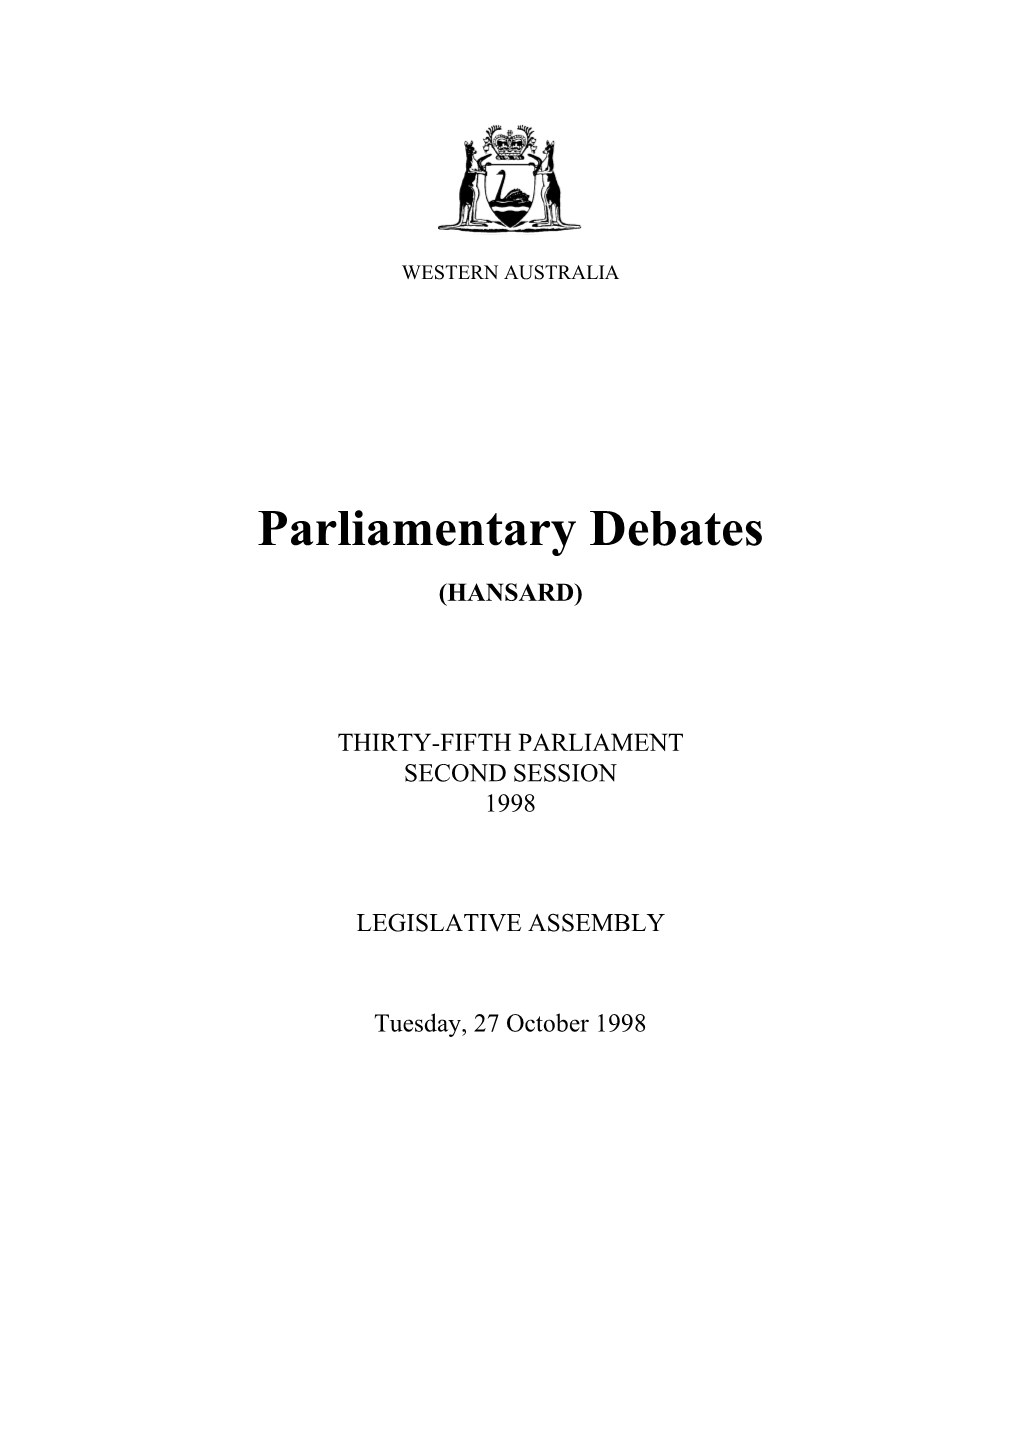 Assembly Tuesday, 27 October 1998